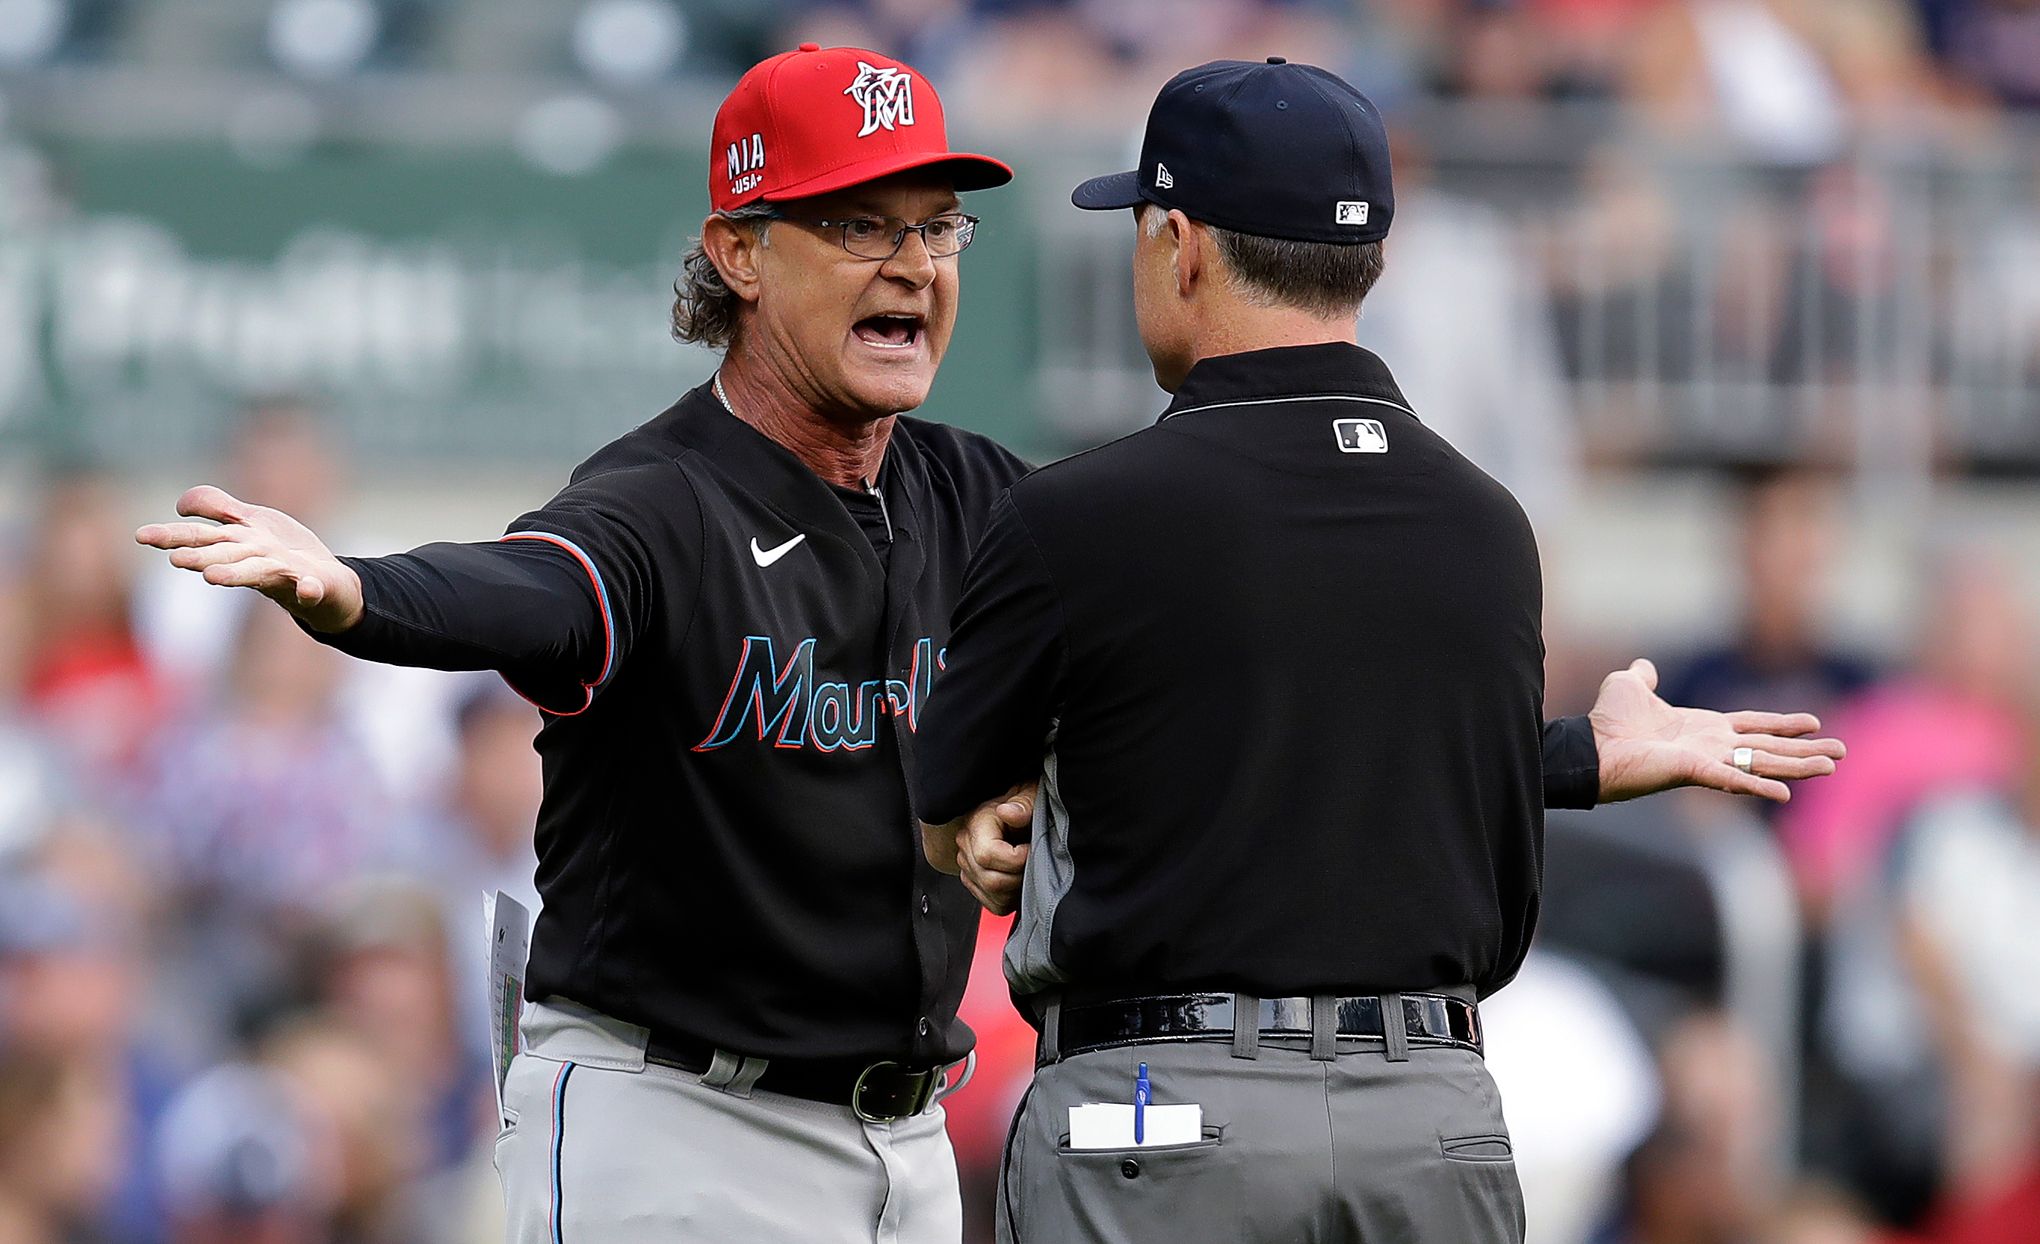 For Don Mattingly, 'timing was right' to join Marlins